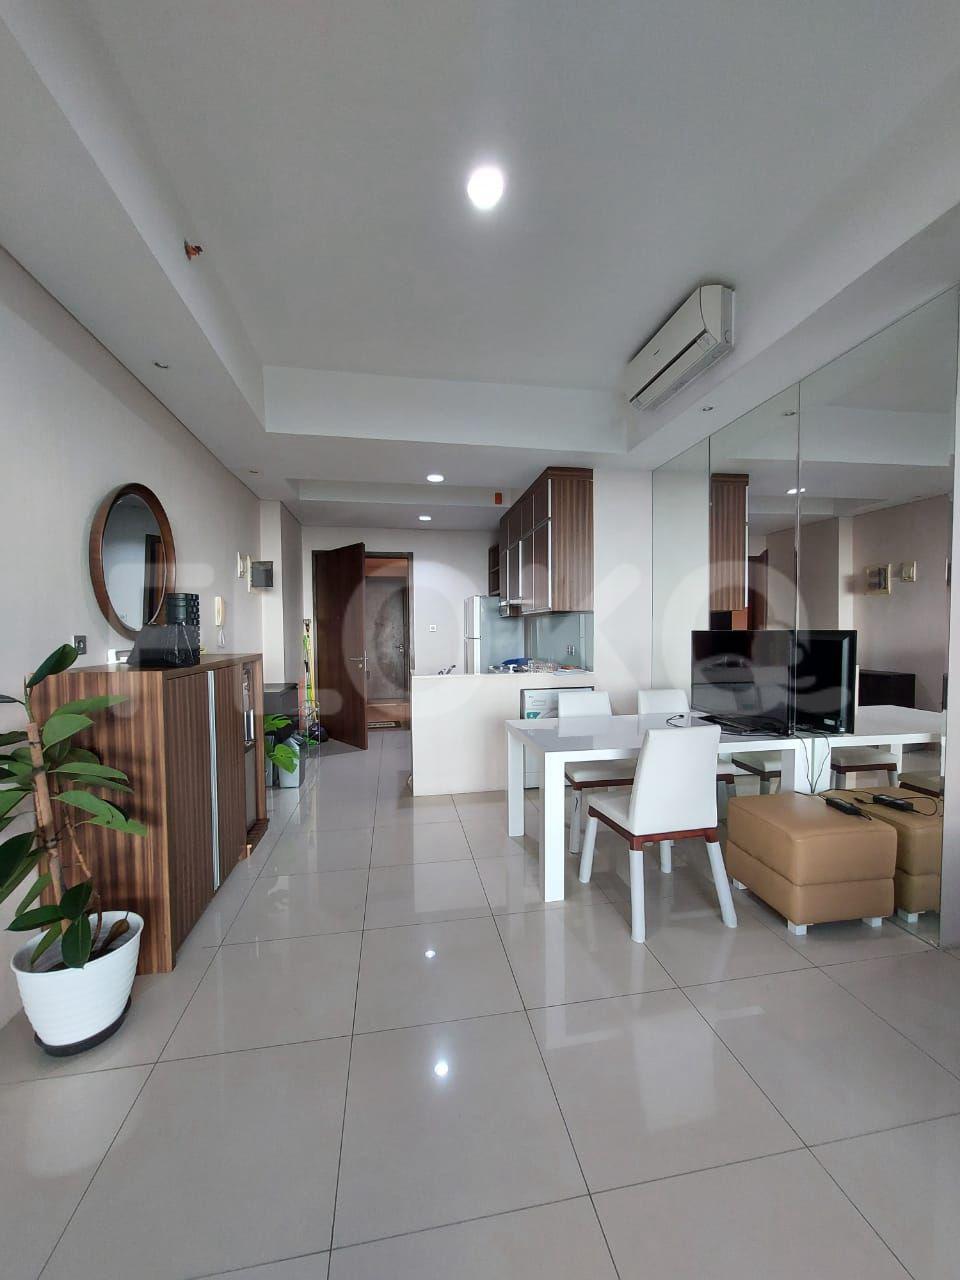 2 Bedroom on 17th Floor fke98d for Rent in Kemang Village Empire Tower